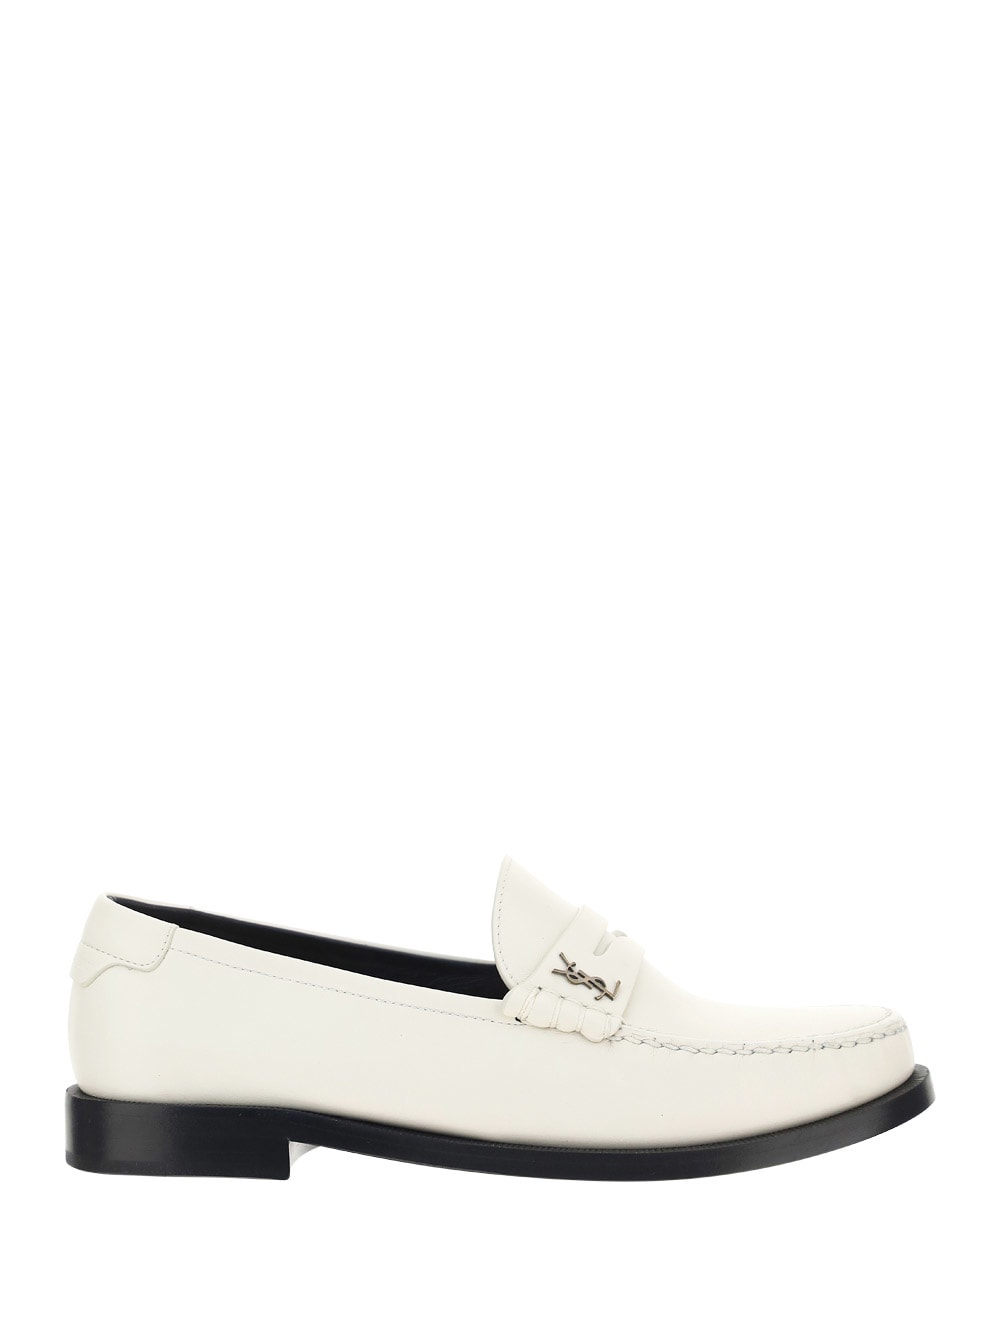 Saint Laurent Loafers In Pearl